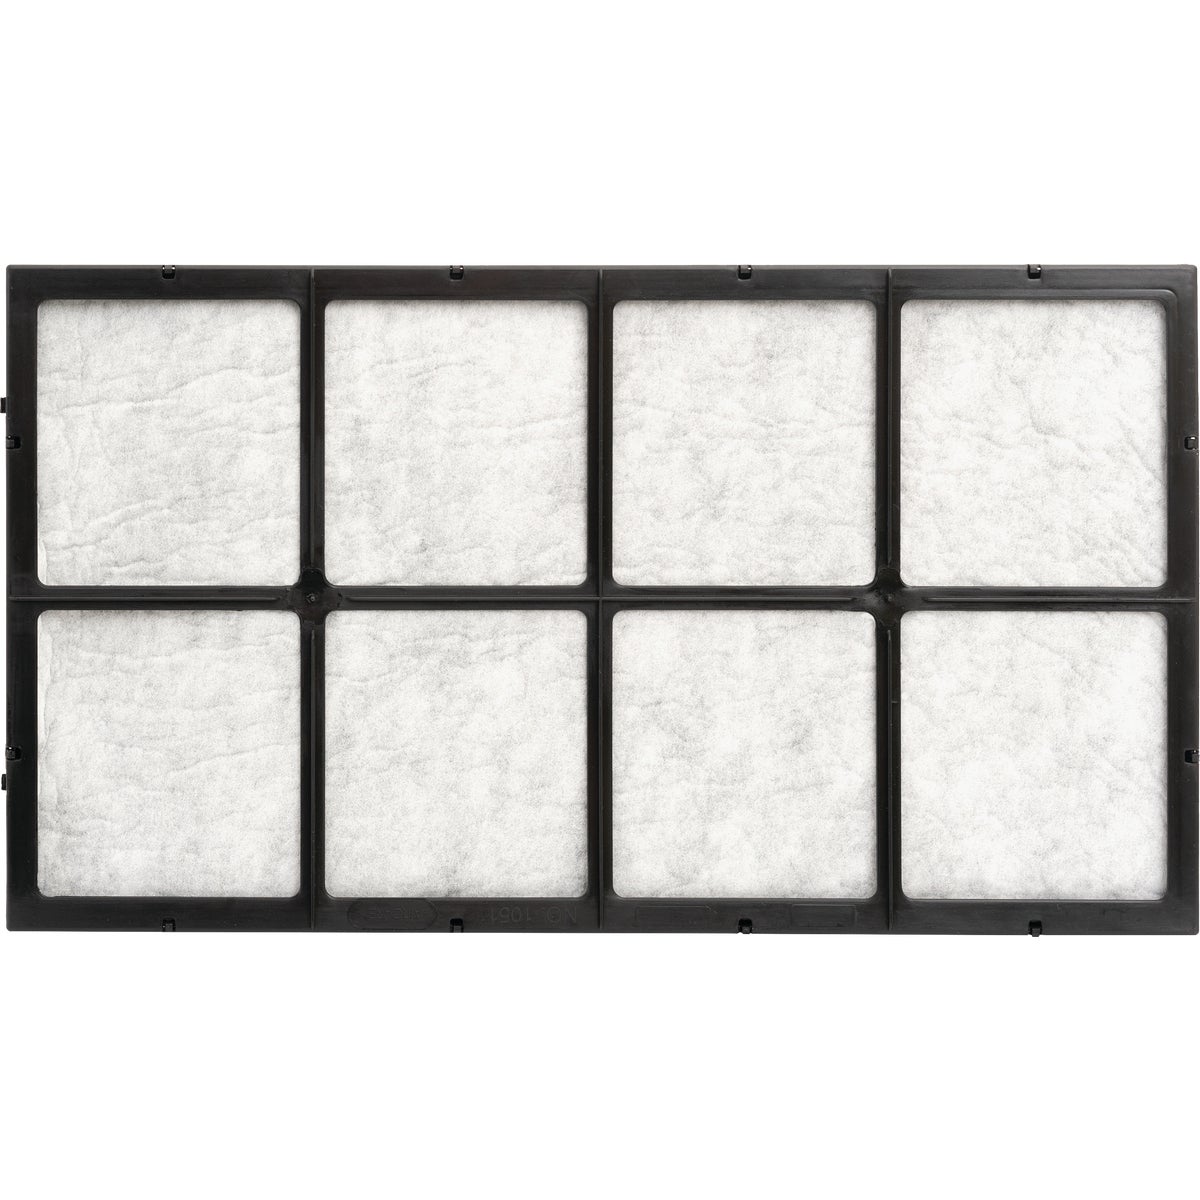 Essick Air AIRCARE 1051 Humidifier Filter with Air Filter